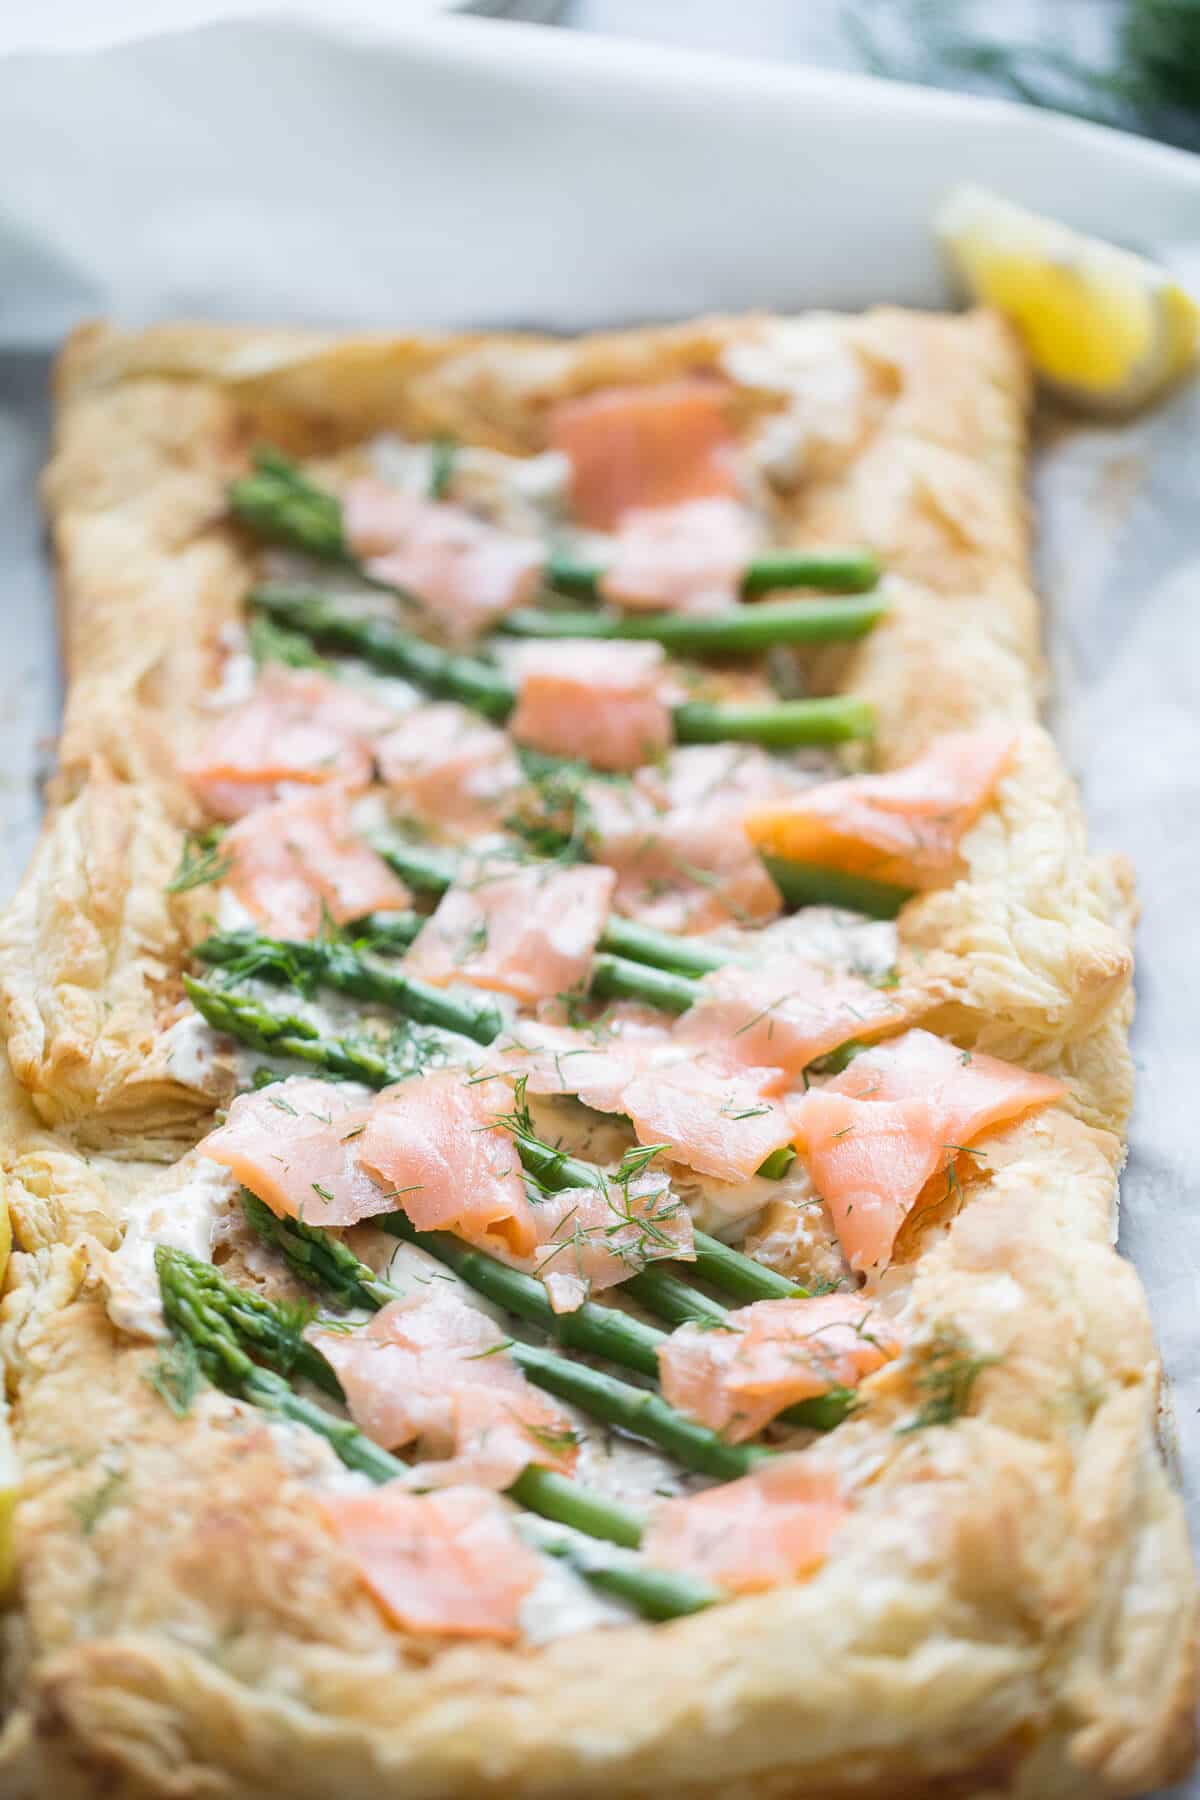 This recipe for asparagus and smoked salmon tart is a simple and elegant addition to any table!